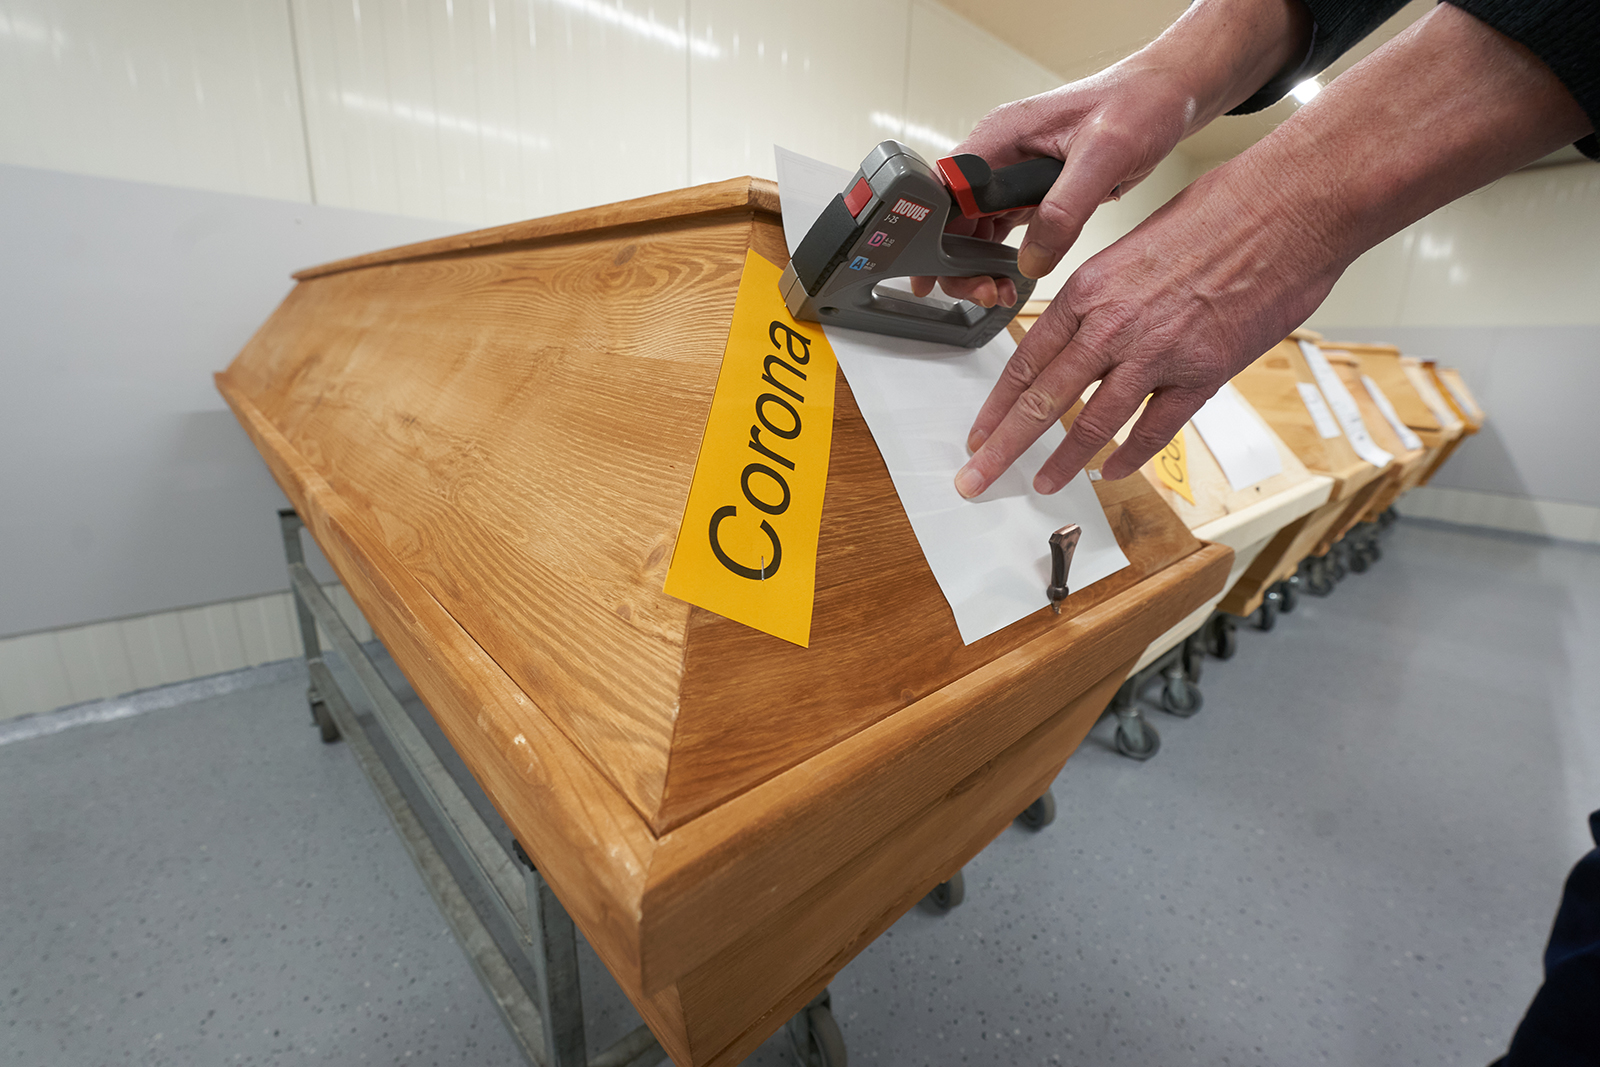 A crematorium employee affixes a "Corona" marker to a coffin in Dachsenhausen, Germany on January 22.